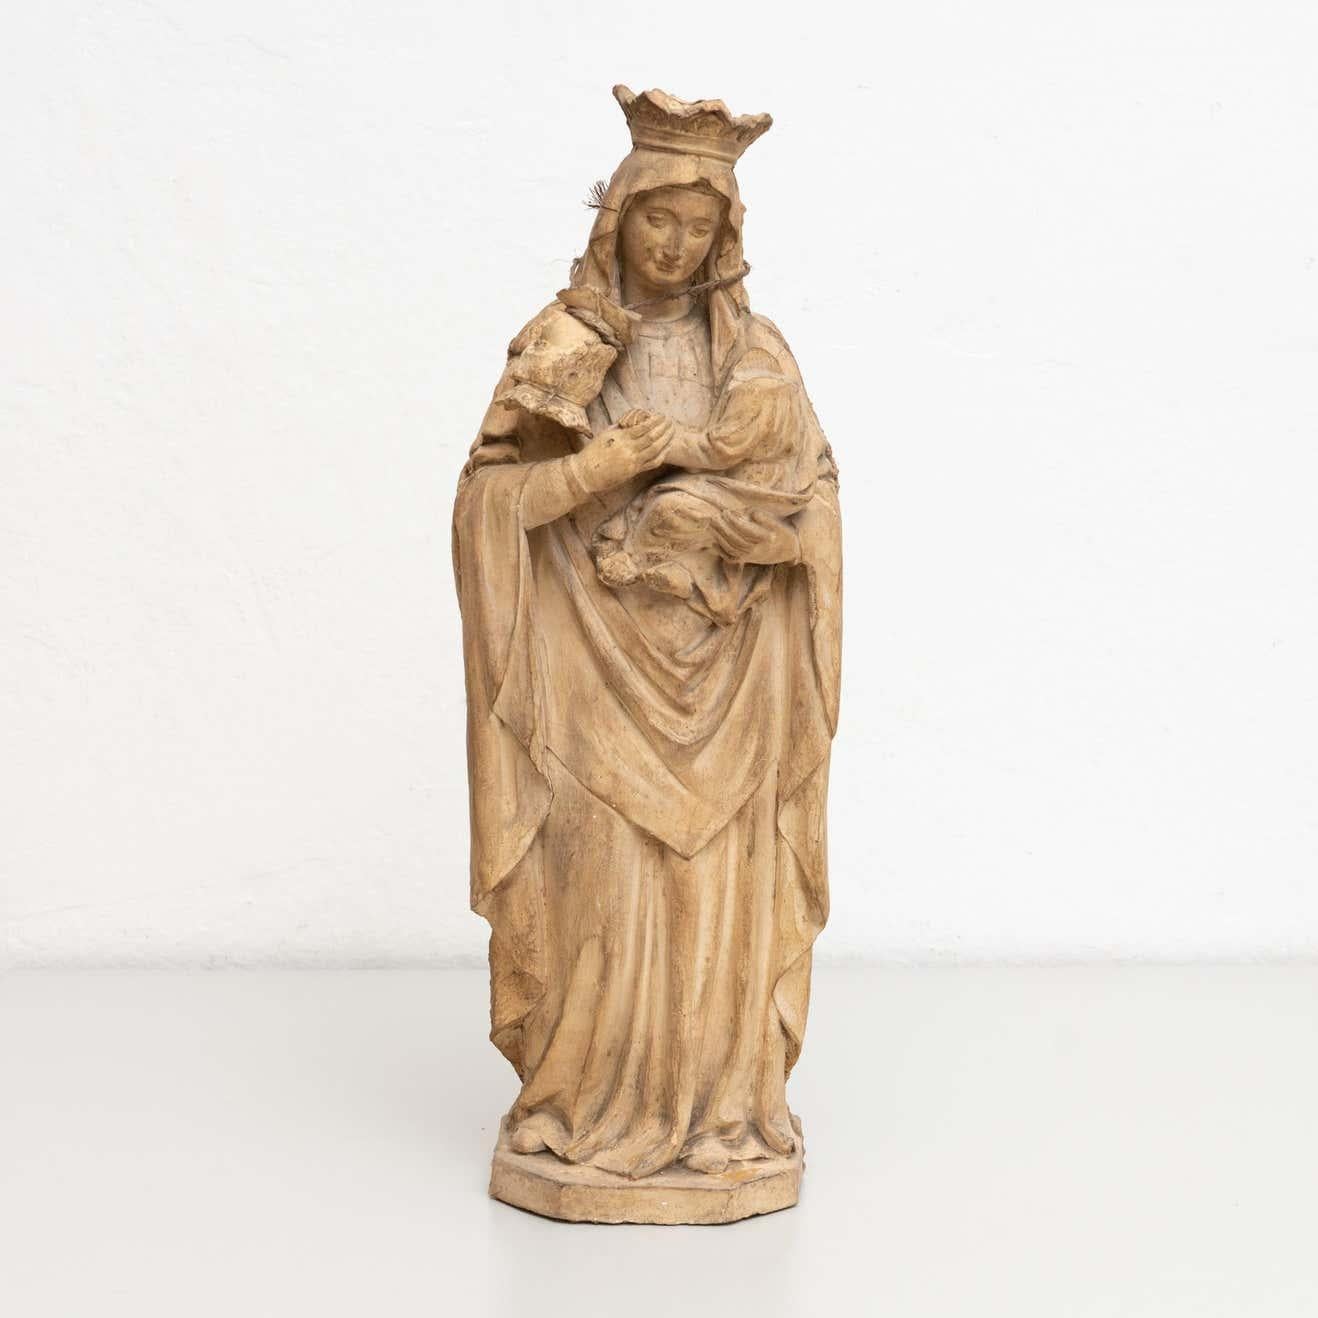 Traditional religious plaster figure of a virgin.

Made in traditional Catalan atelier in Olot, Spain, circa 1950.

In original condition, with minor wear consistent with age and use, preserving a beautiful patina.

Materials:
plaster.